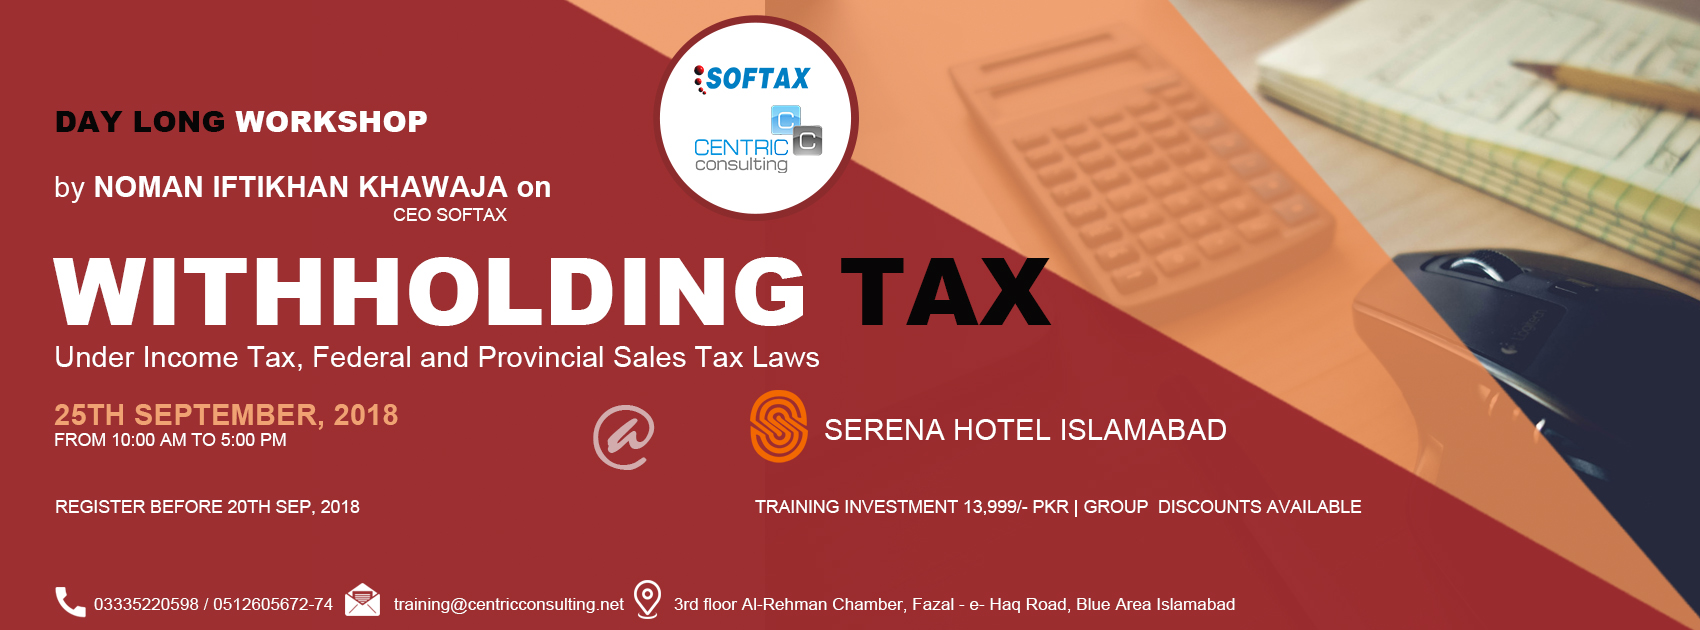 Day Long Workshop on WITHHOLDING TAX